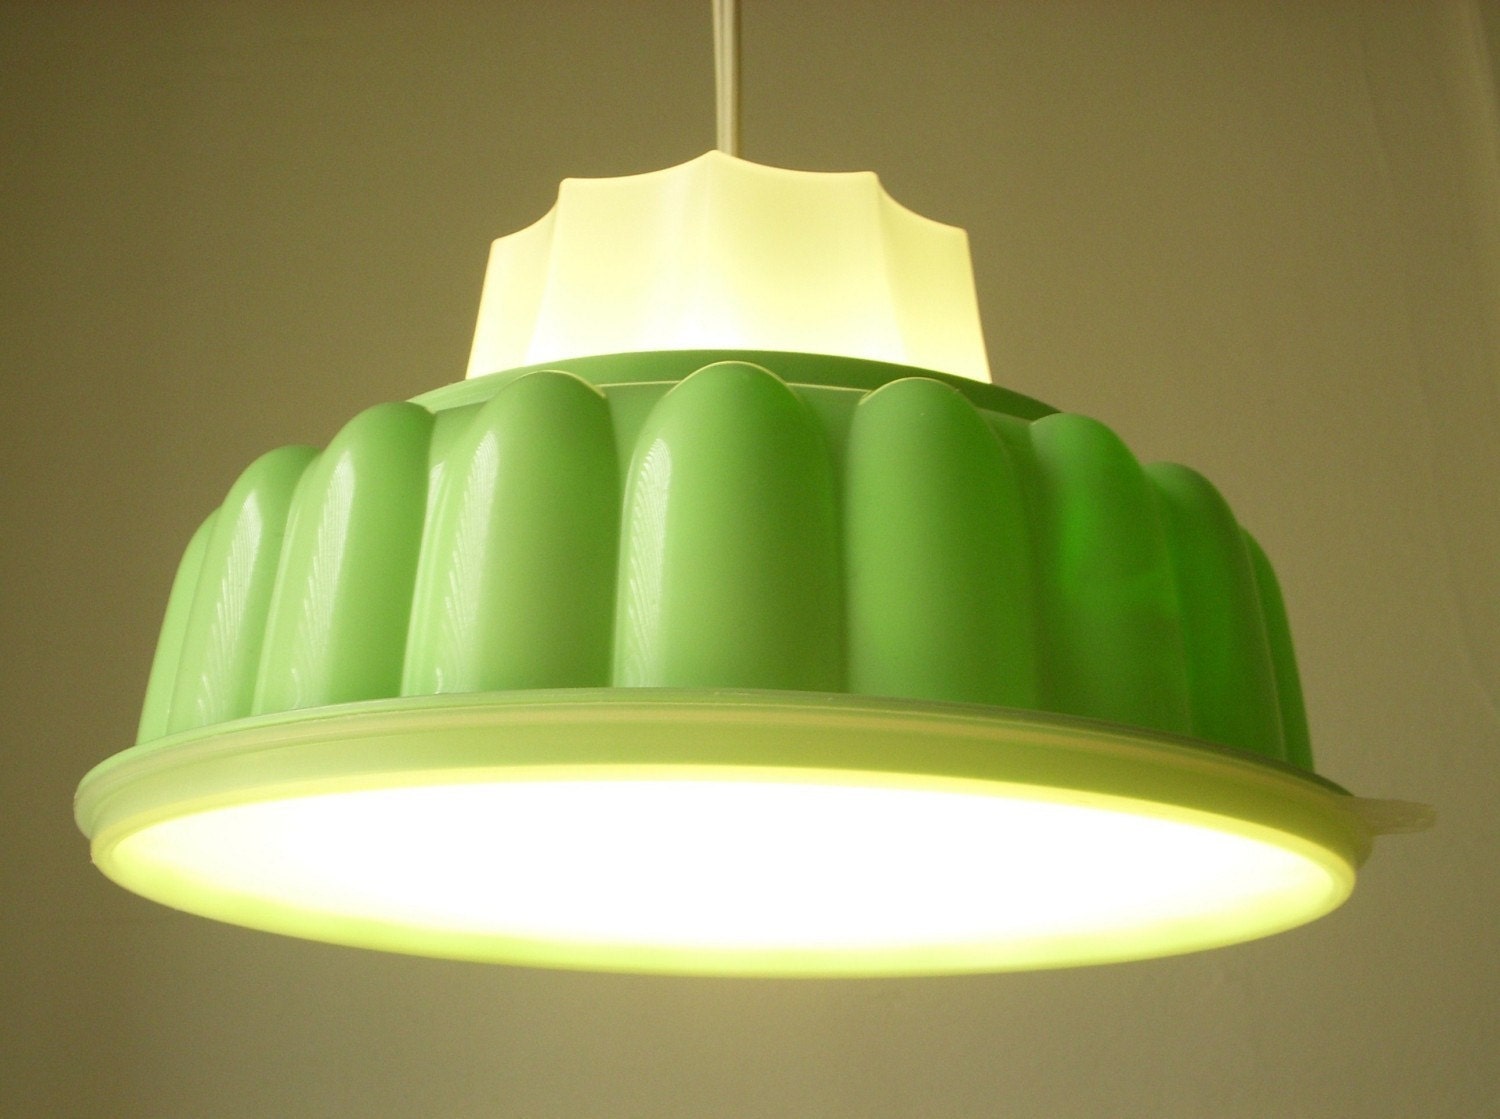 Upcycled Recycled Tupperware TupperLight Retro Mint Green Jell-O Mold Hanging Pendant Light Fixtures